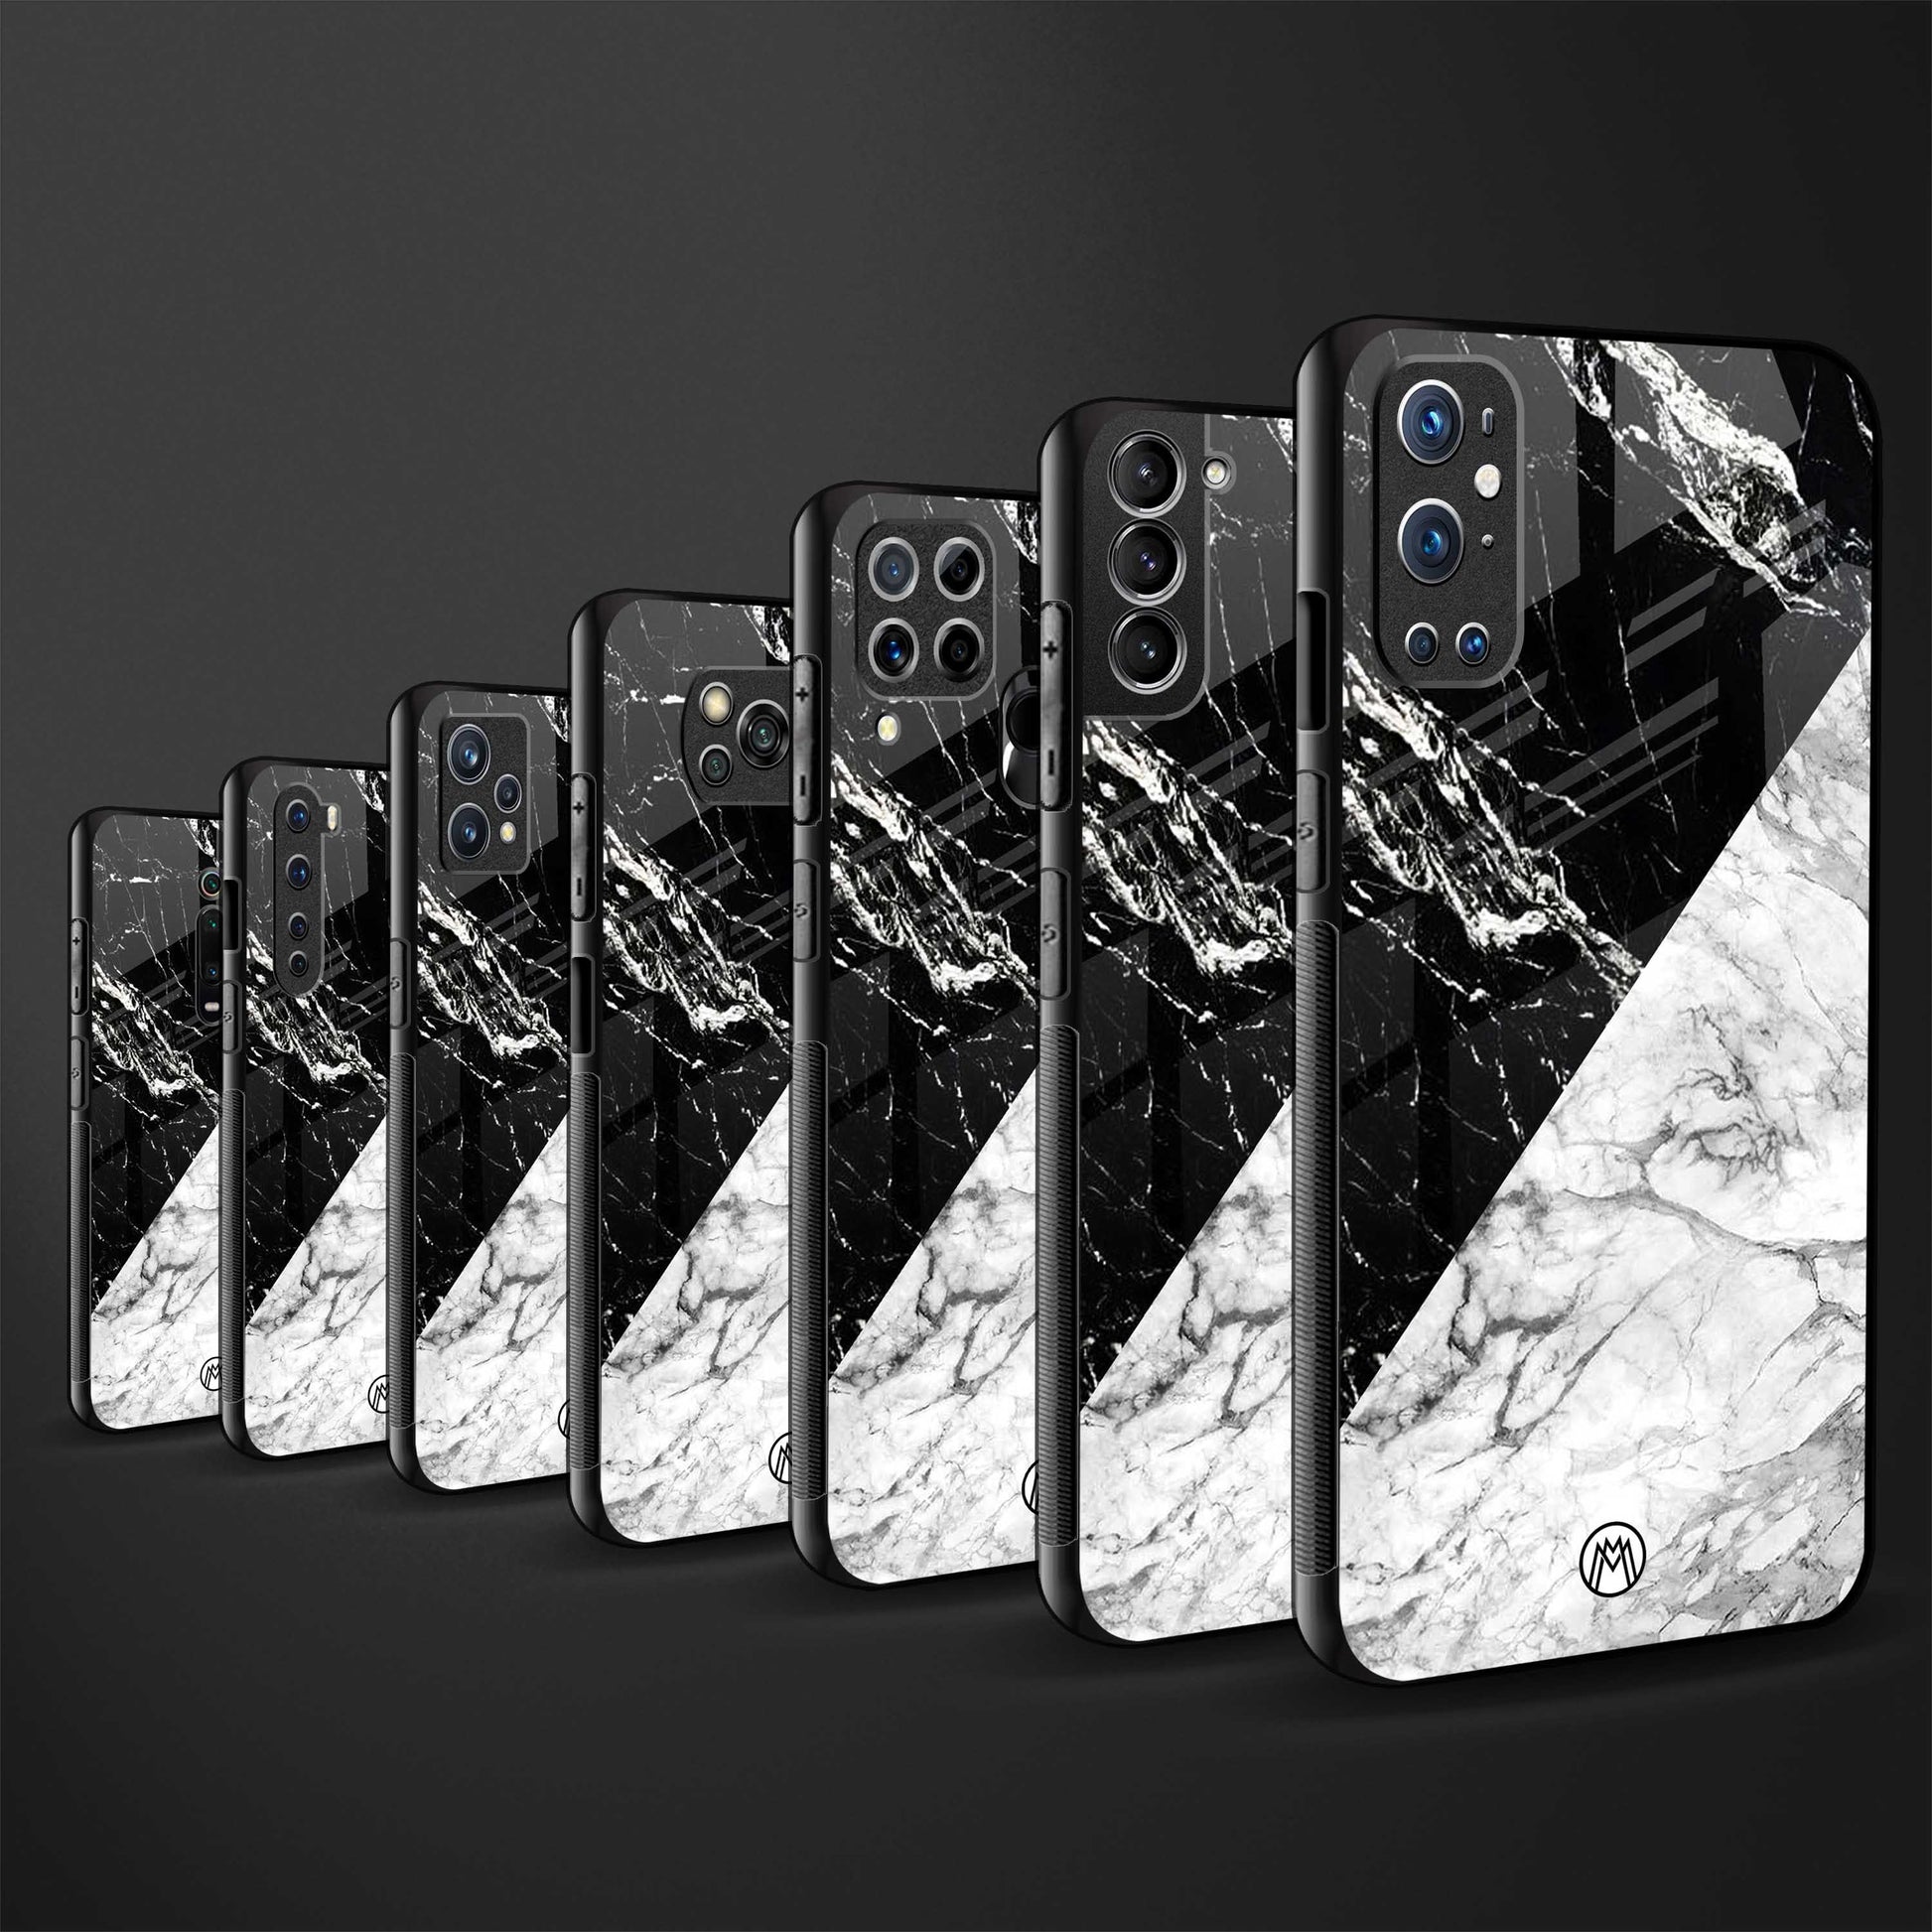 fatal contradiction phone cover for samsung galaxy s9 plus